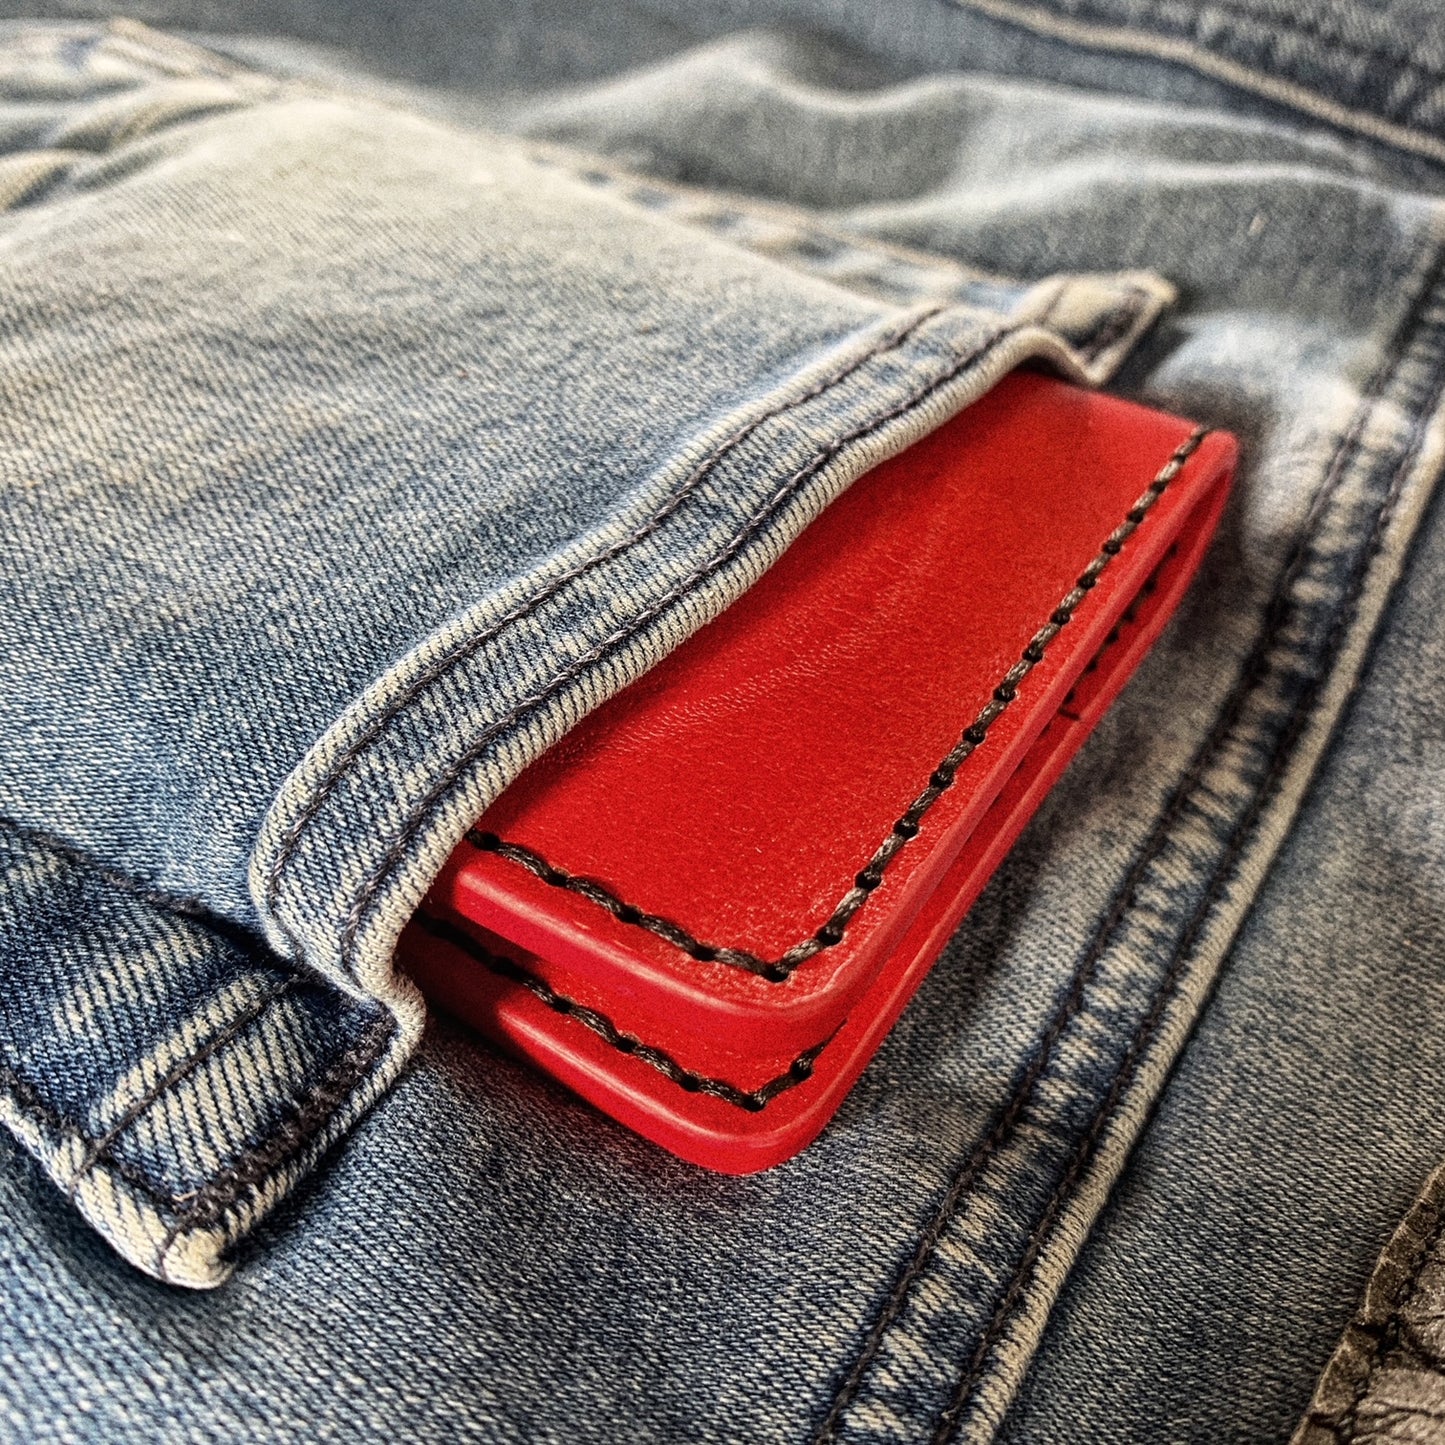 (Only 1) Handmade 6 Pocket Circle J Branded Red Leather Bifold Minimalist Wallet